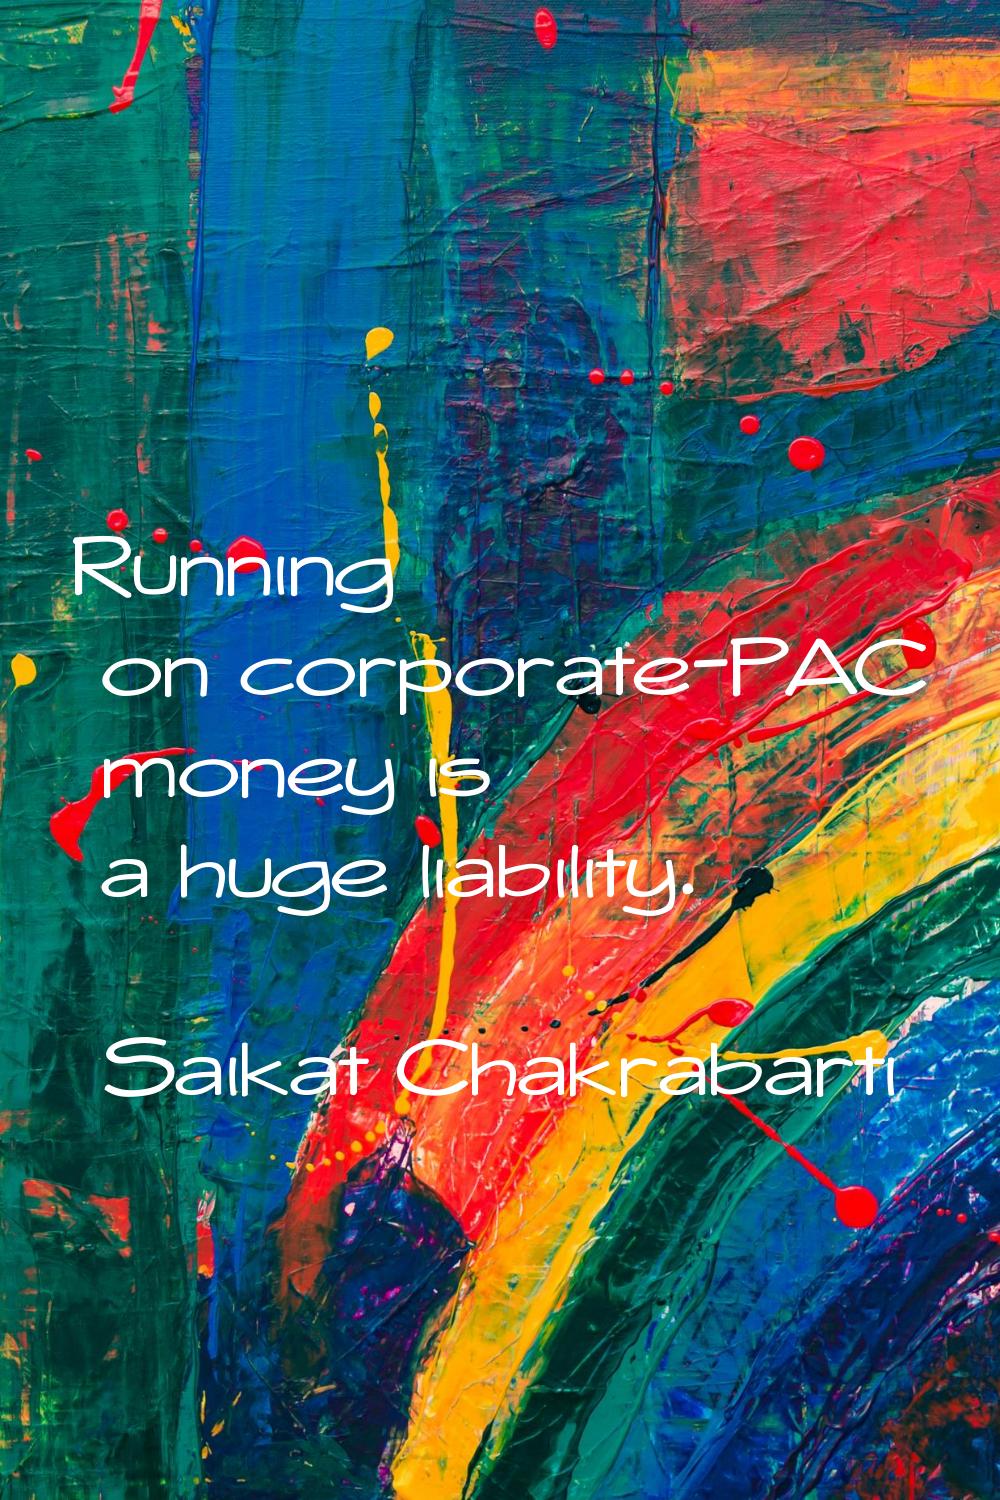 Running on corporate-PAC money is a huge liability.